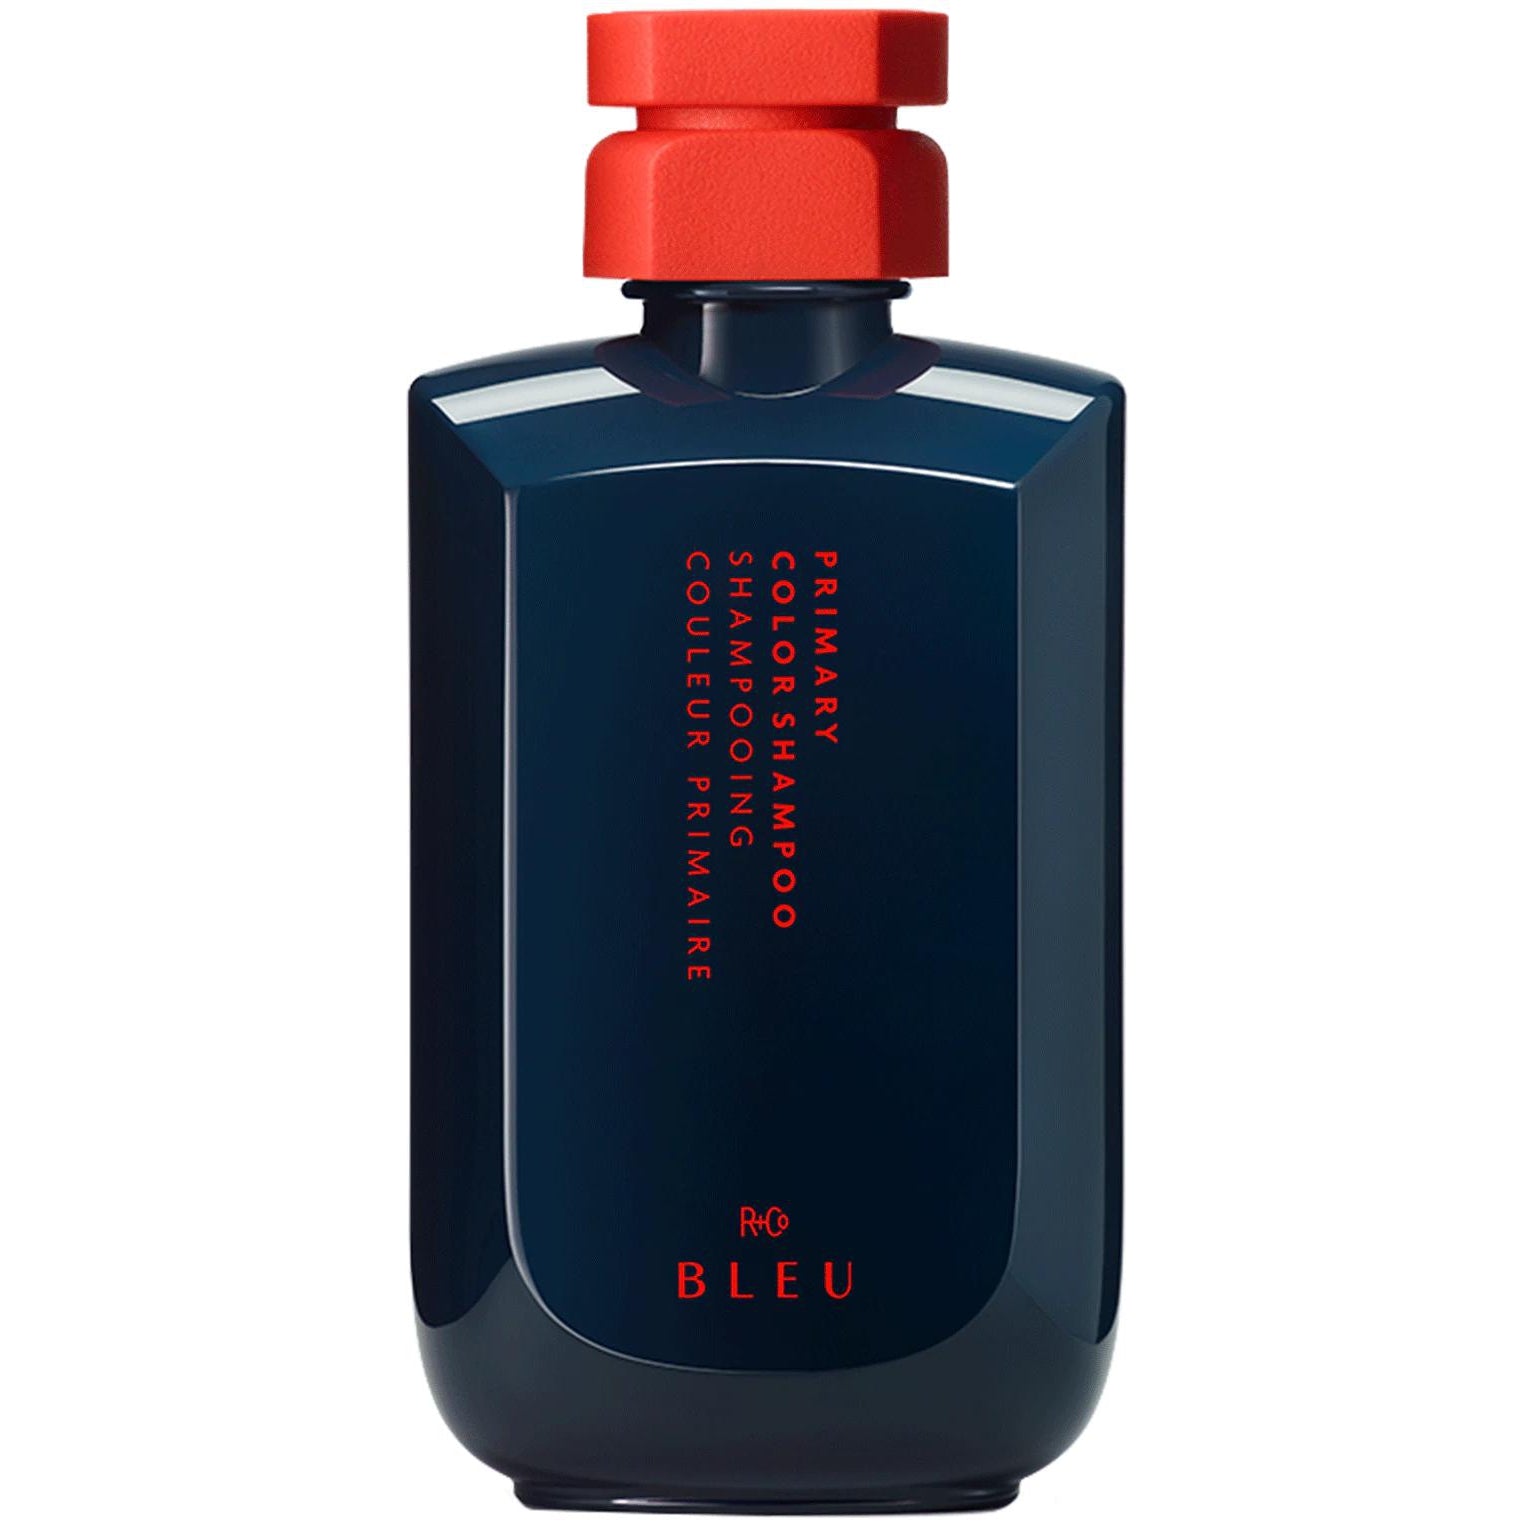 Luxury_haircare_r_co-bleu_primarycolorshampoo_1000x_png